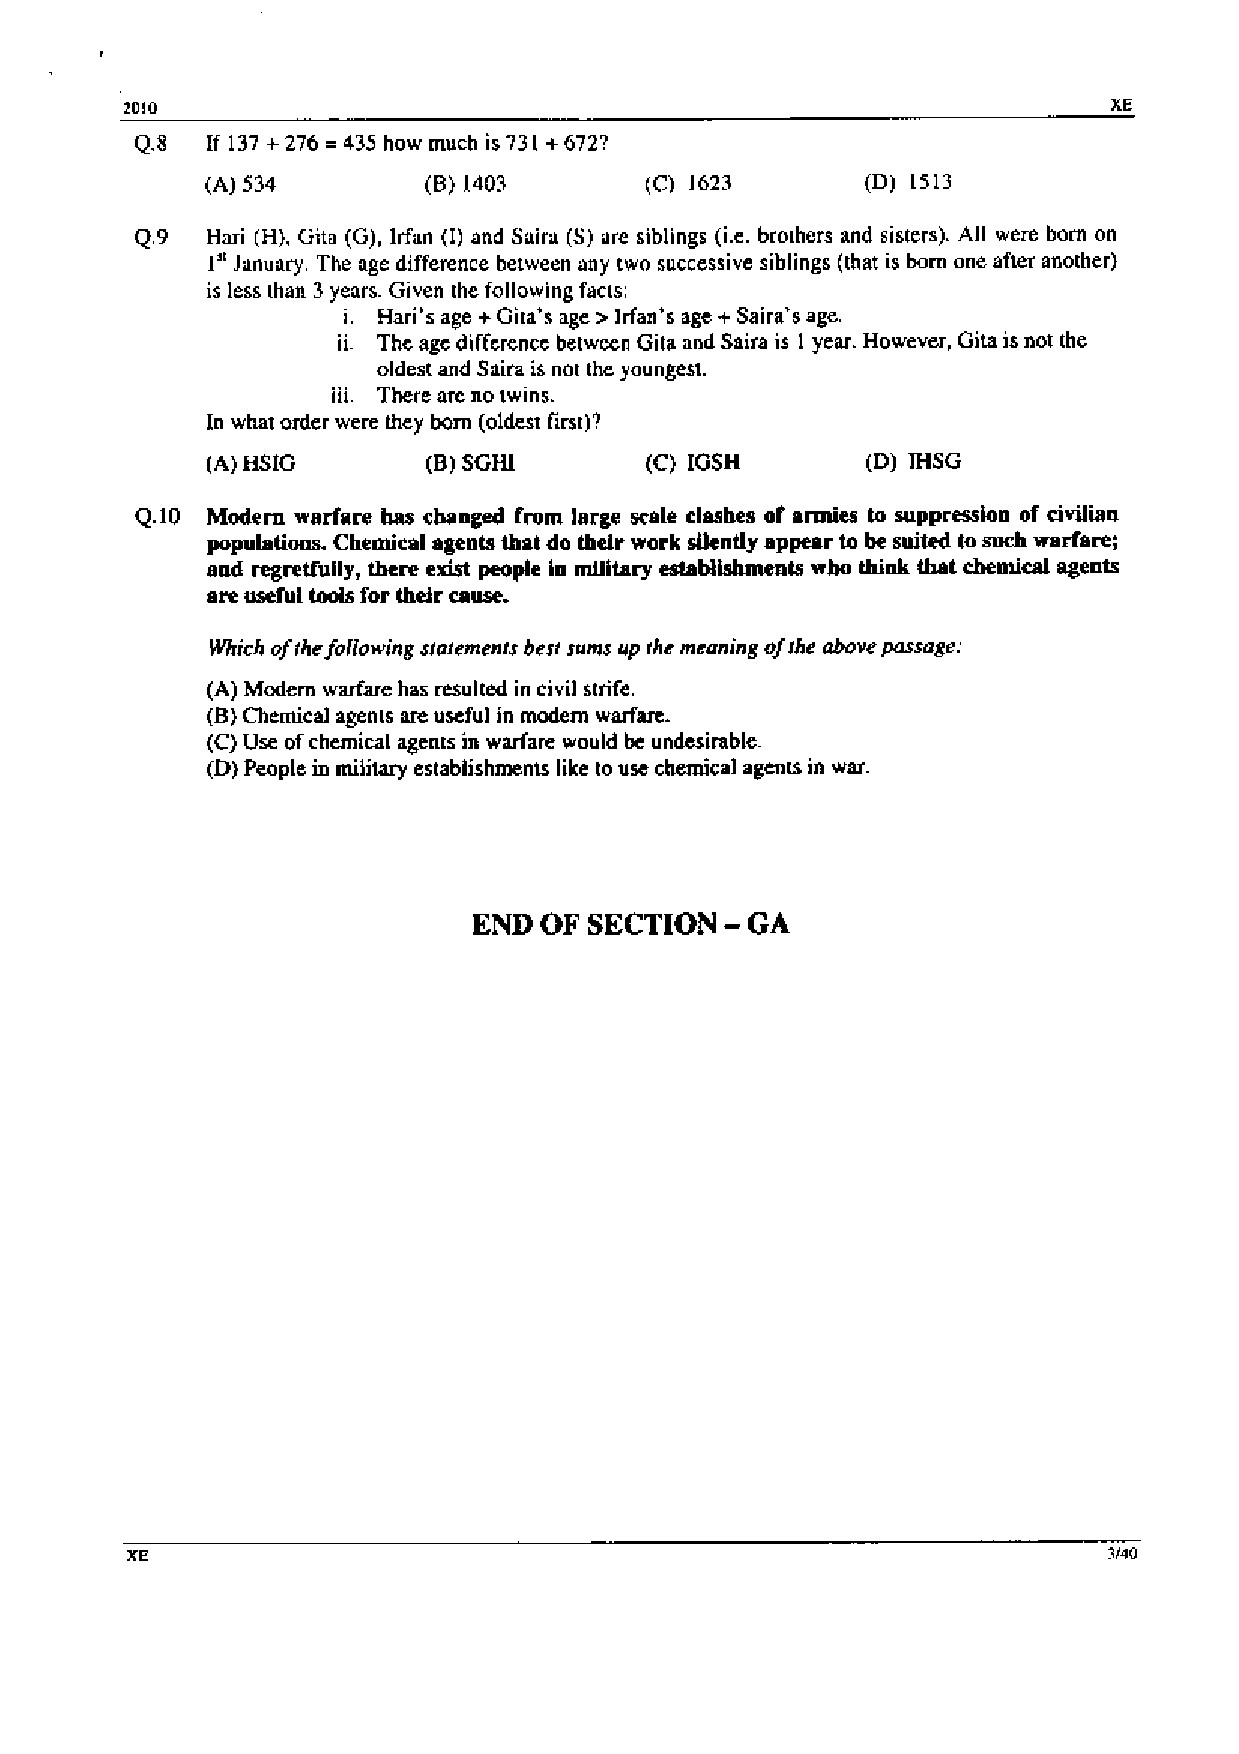 GATE Exam Question Paper 2010 Engineering Sciences 3